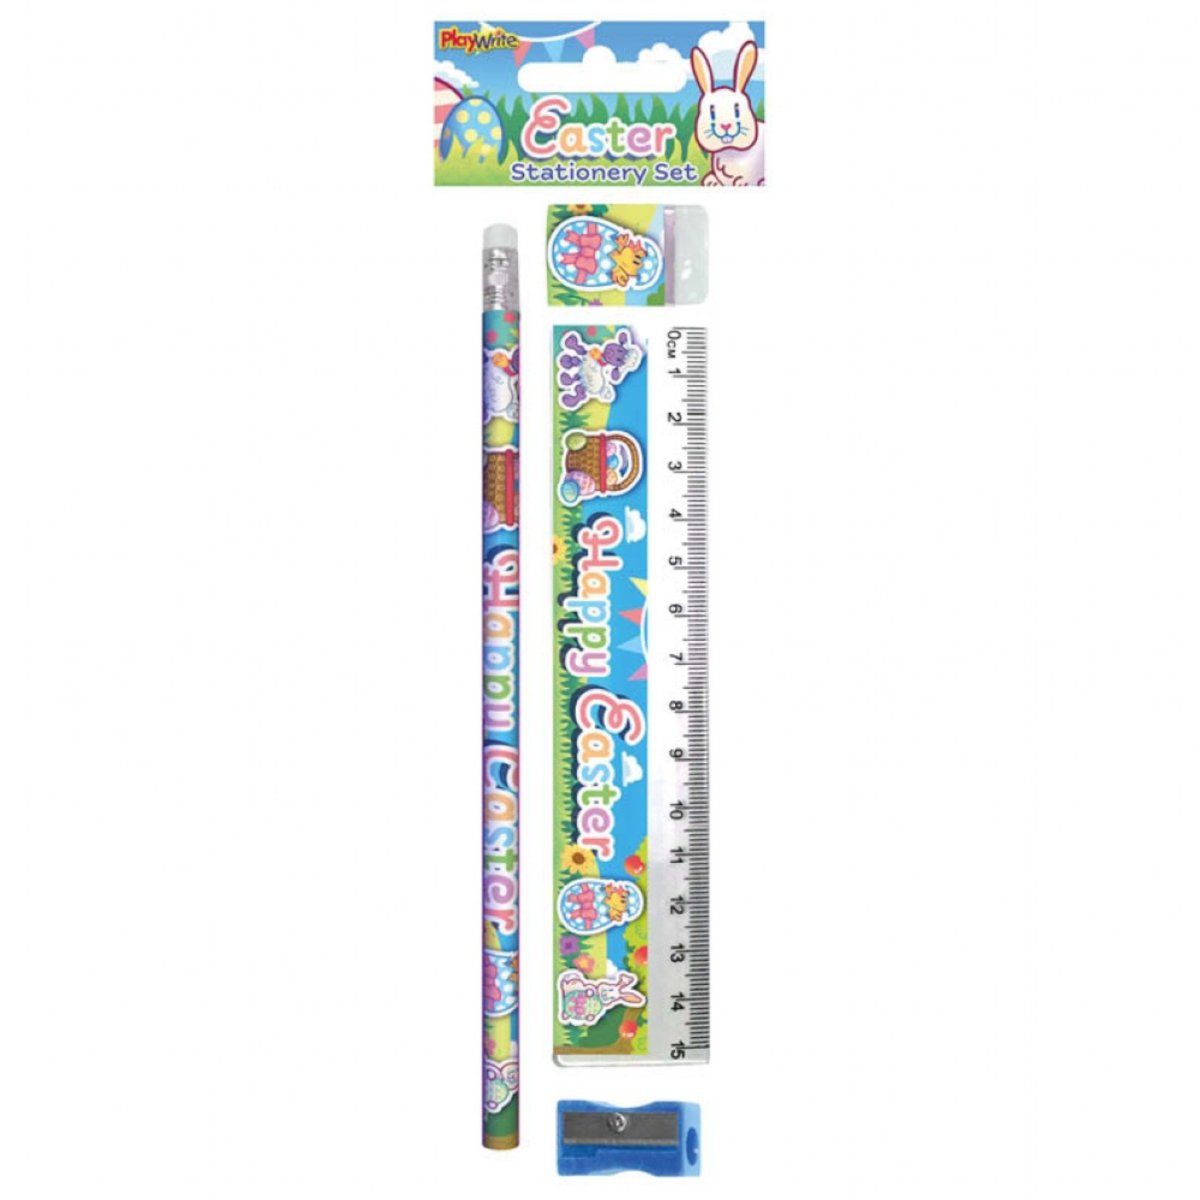 Easter Stationery Set 4 Piece - Kids Party Craft